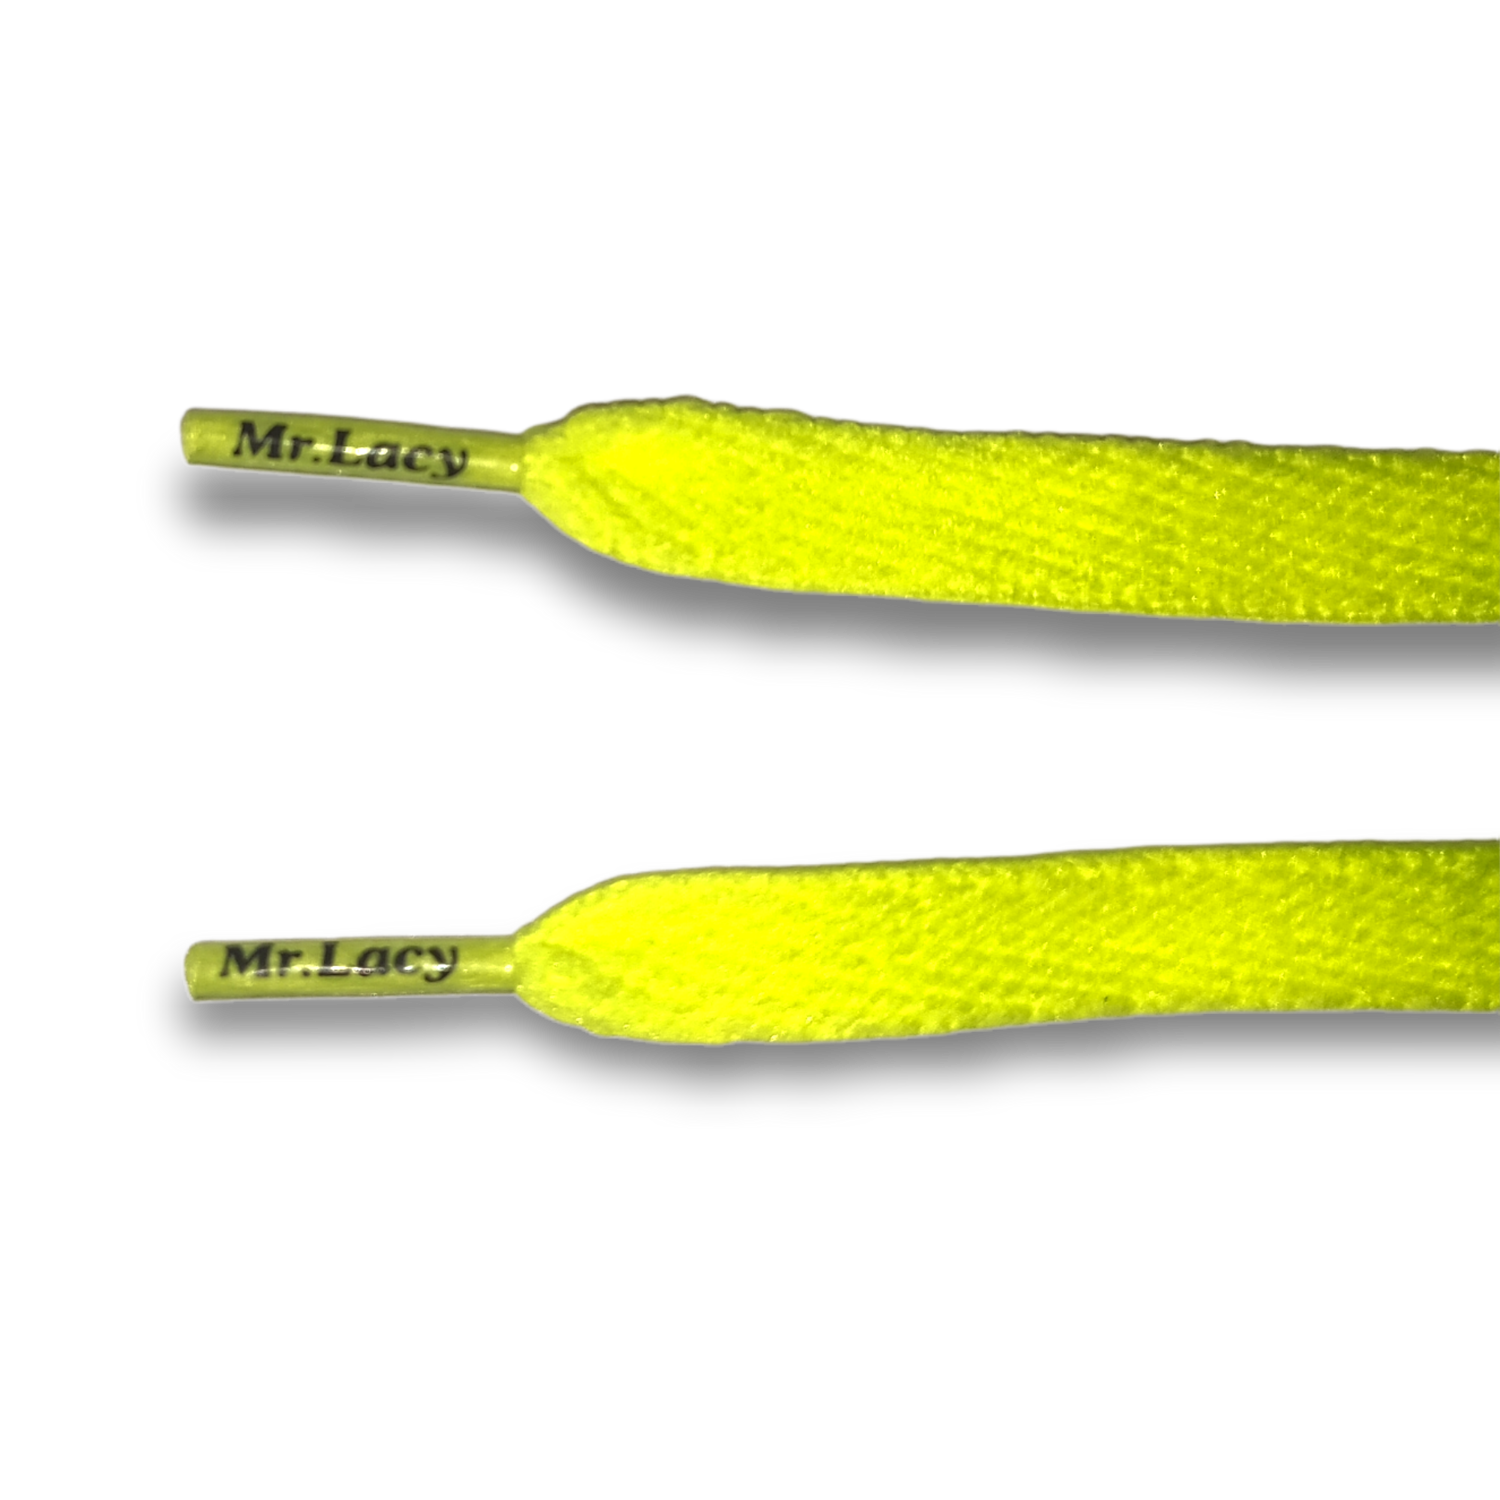 High Visability Neon Lime Yellow Shoe Laces! Mr.Lacy